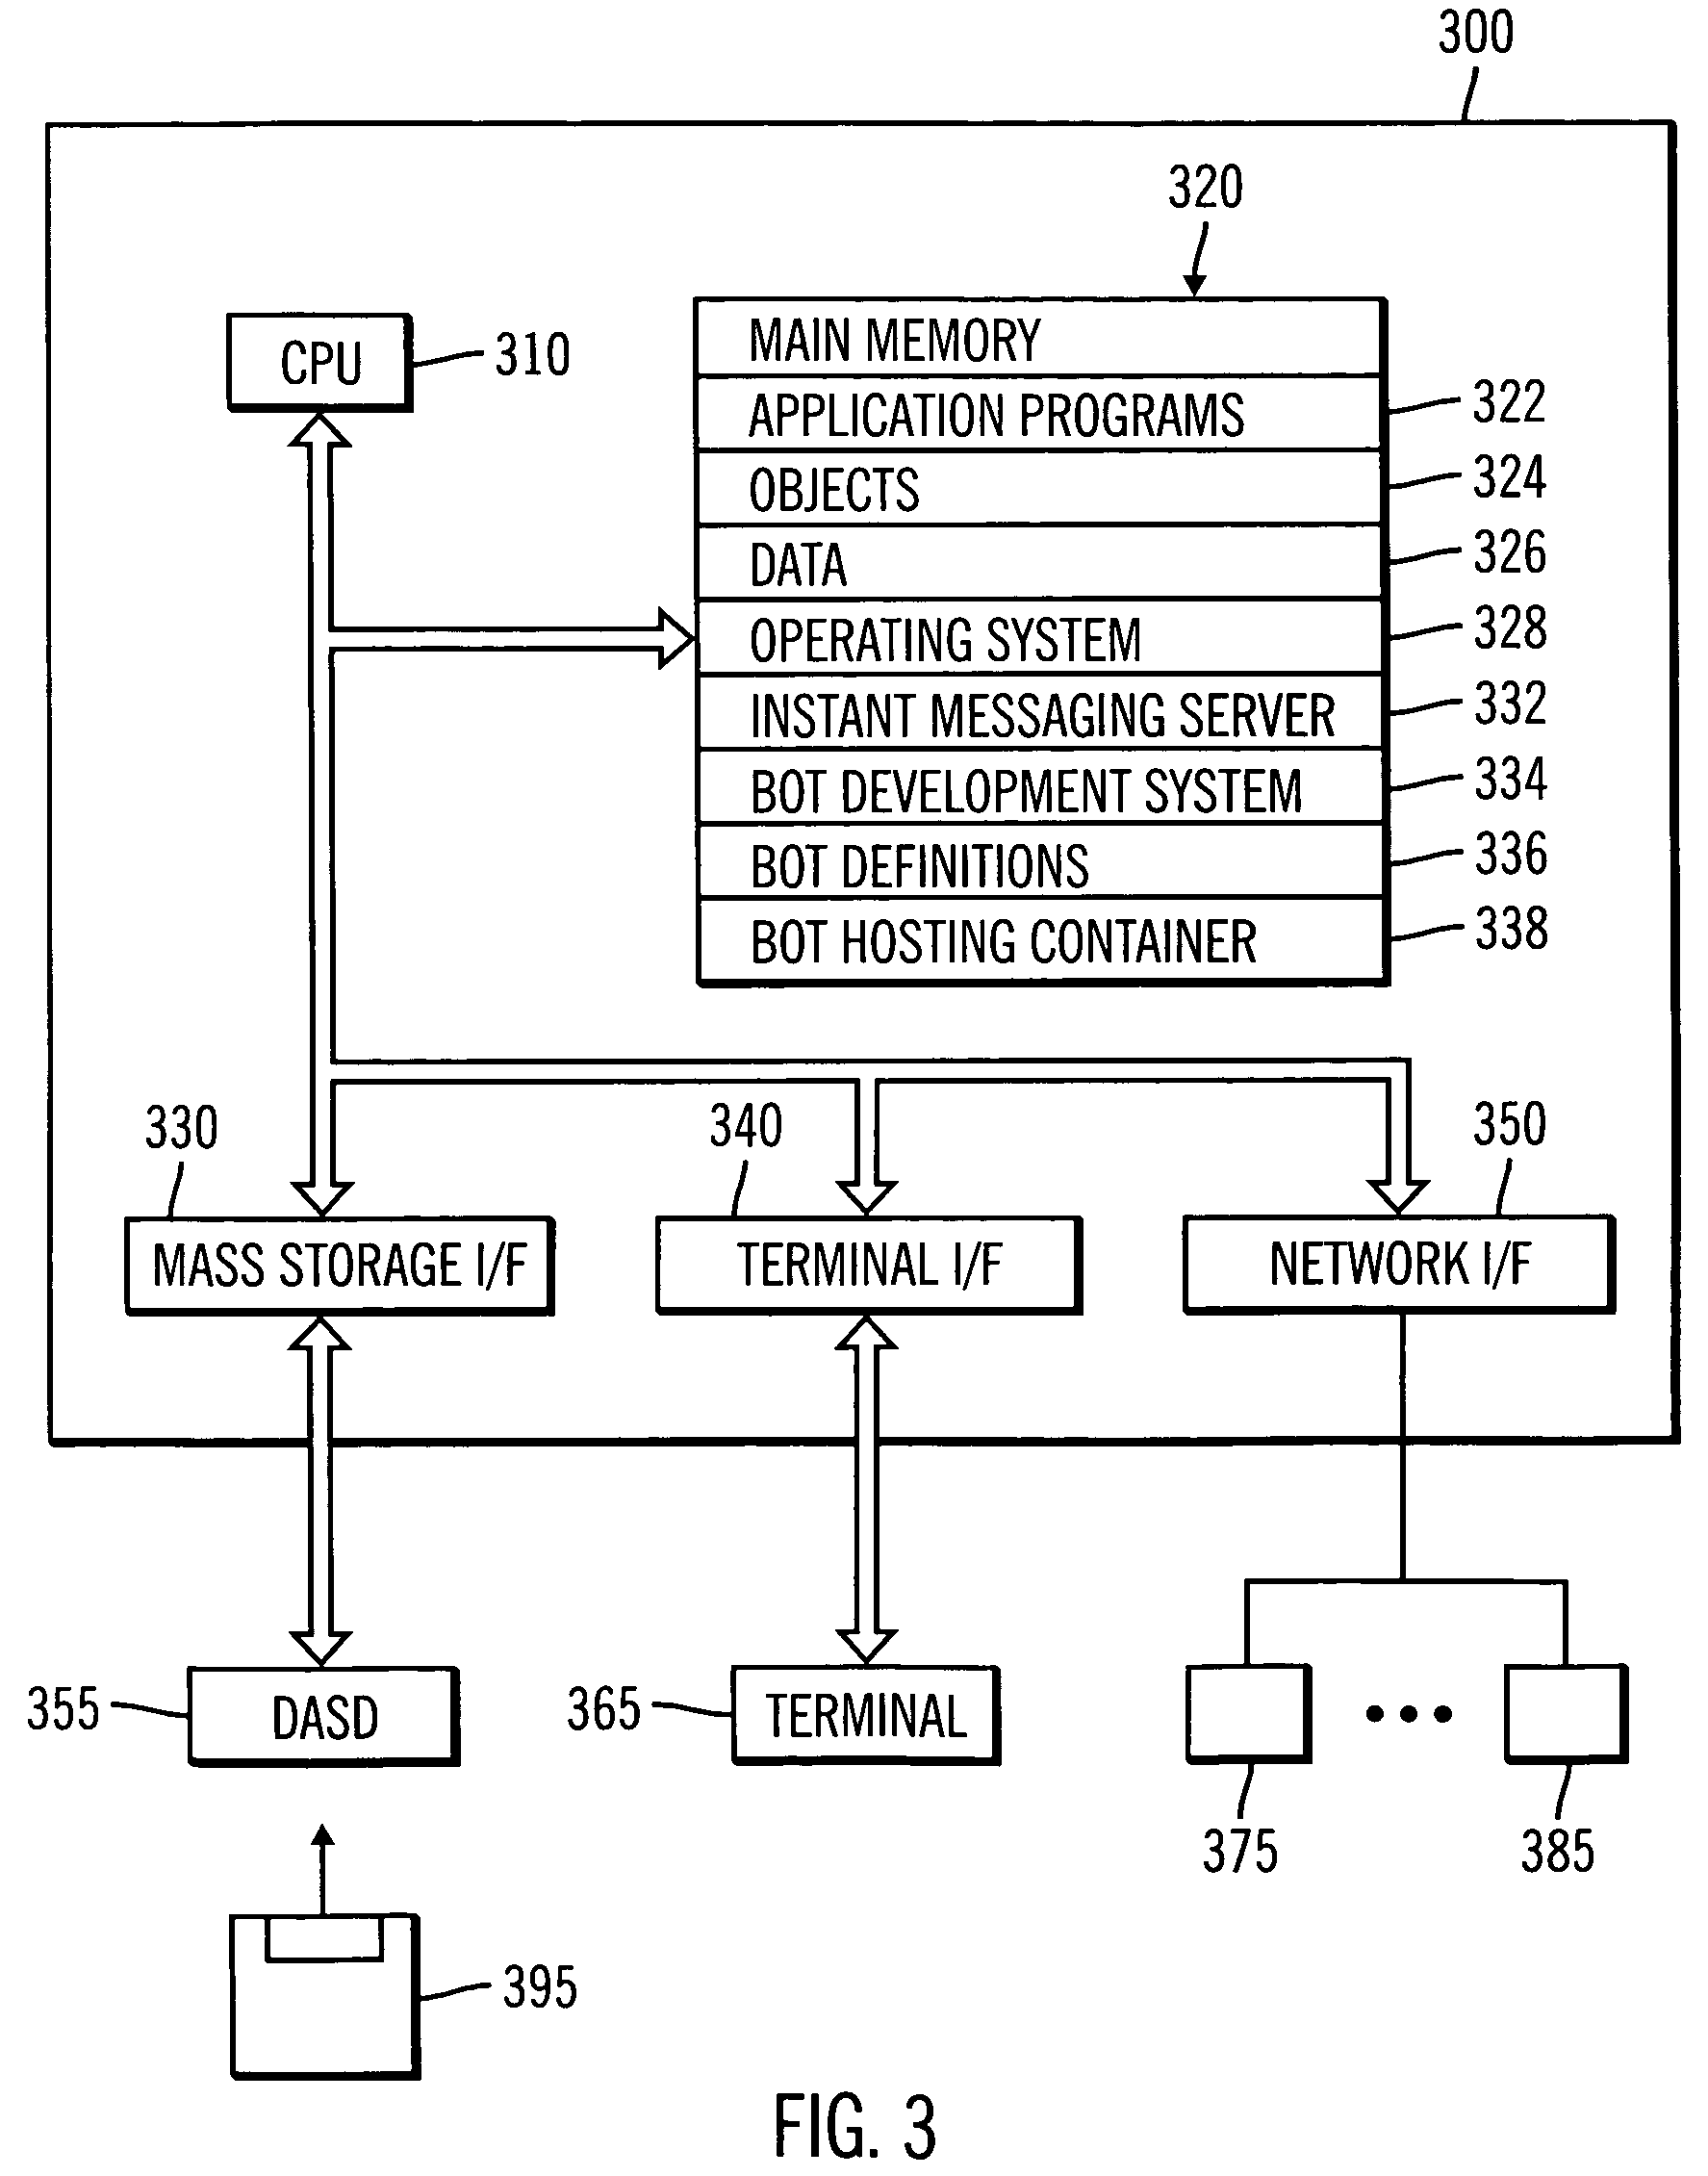 Method and system for instant messaging Bots specification using state transition methodology and XML